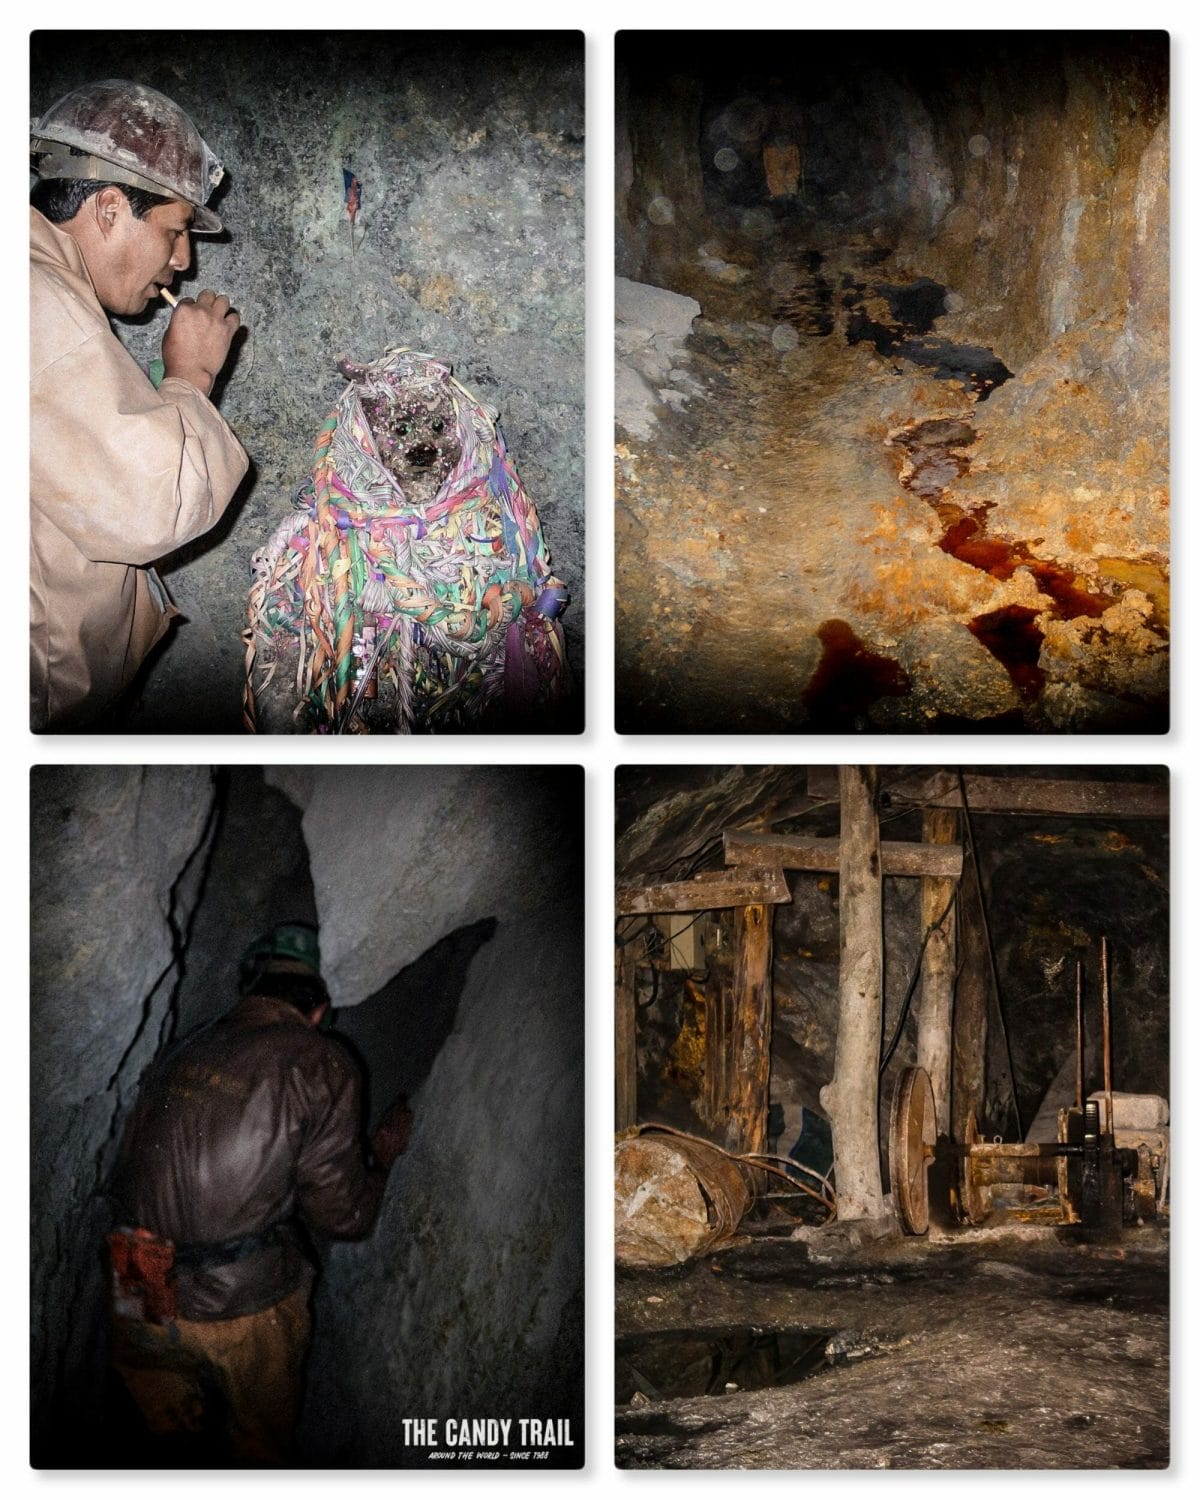 inside Bolivia's Potosi mines of narrow passages, mud, and broken machinery.